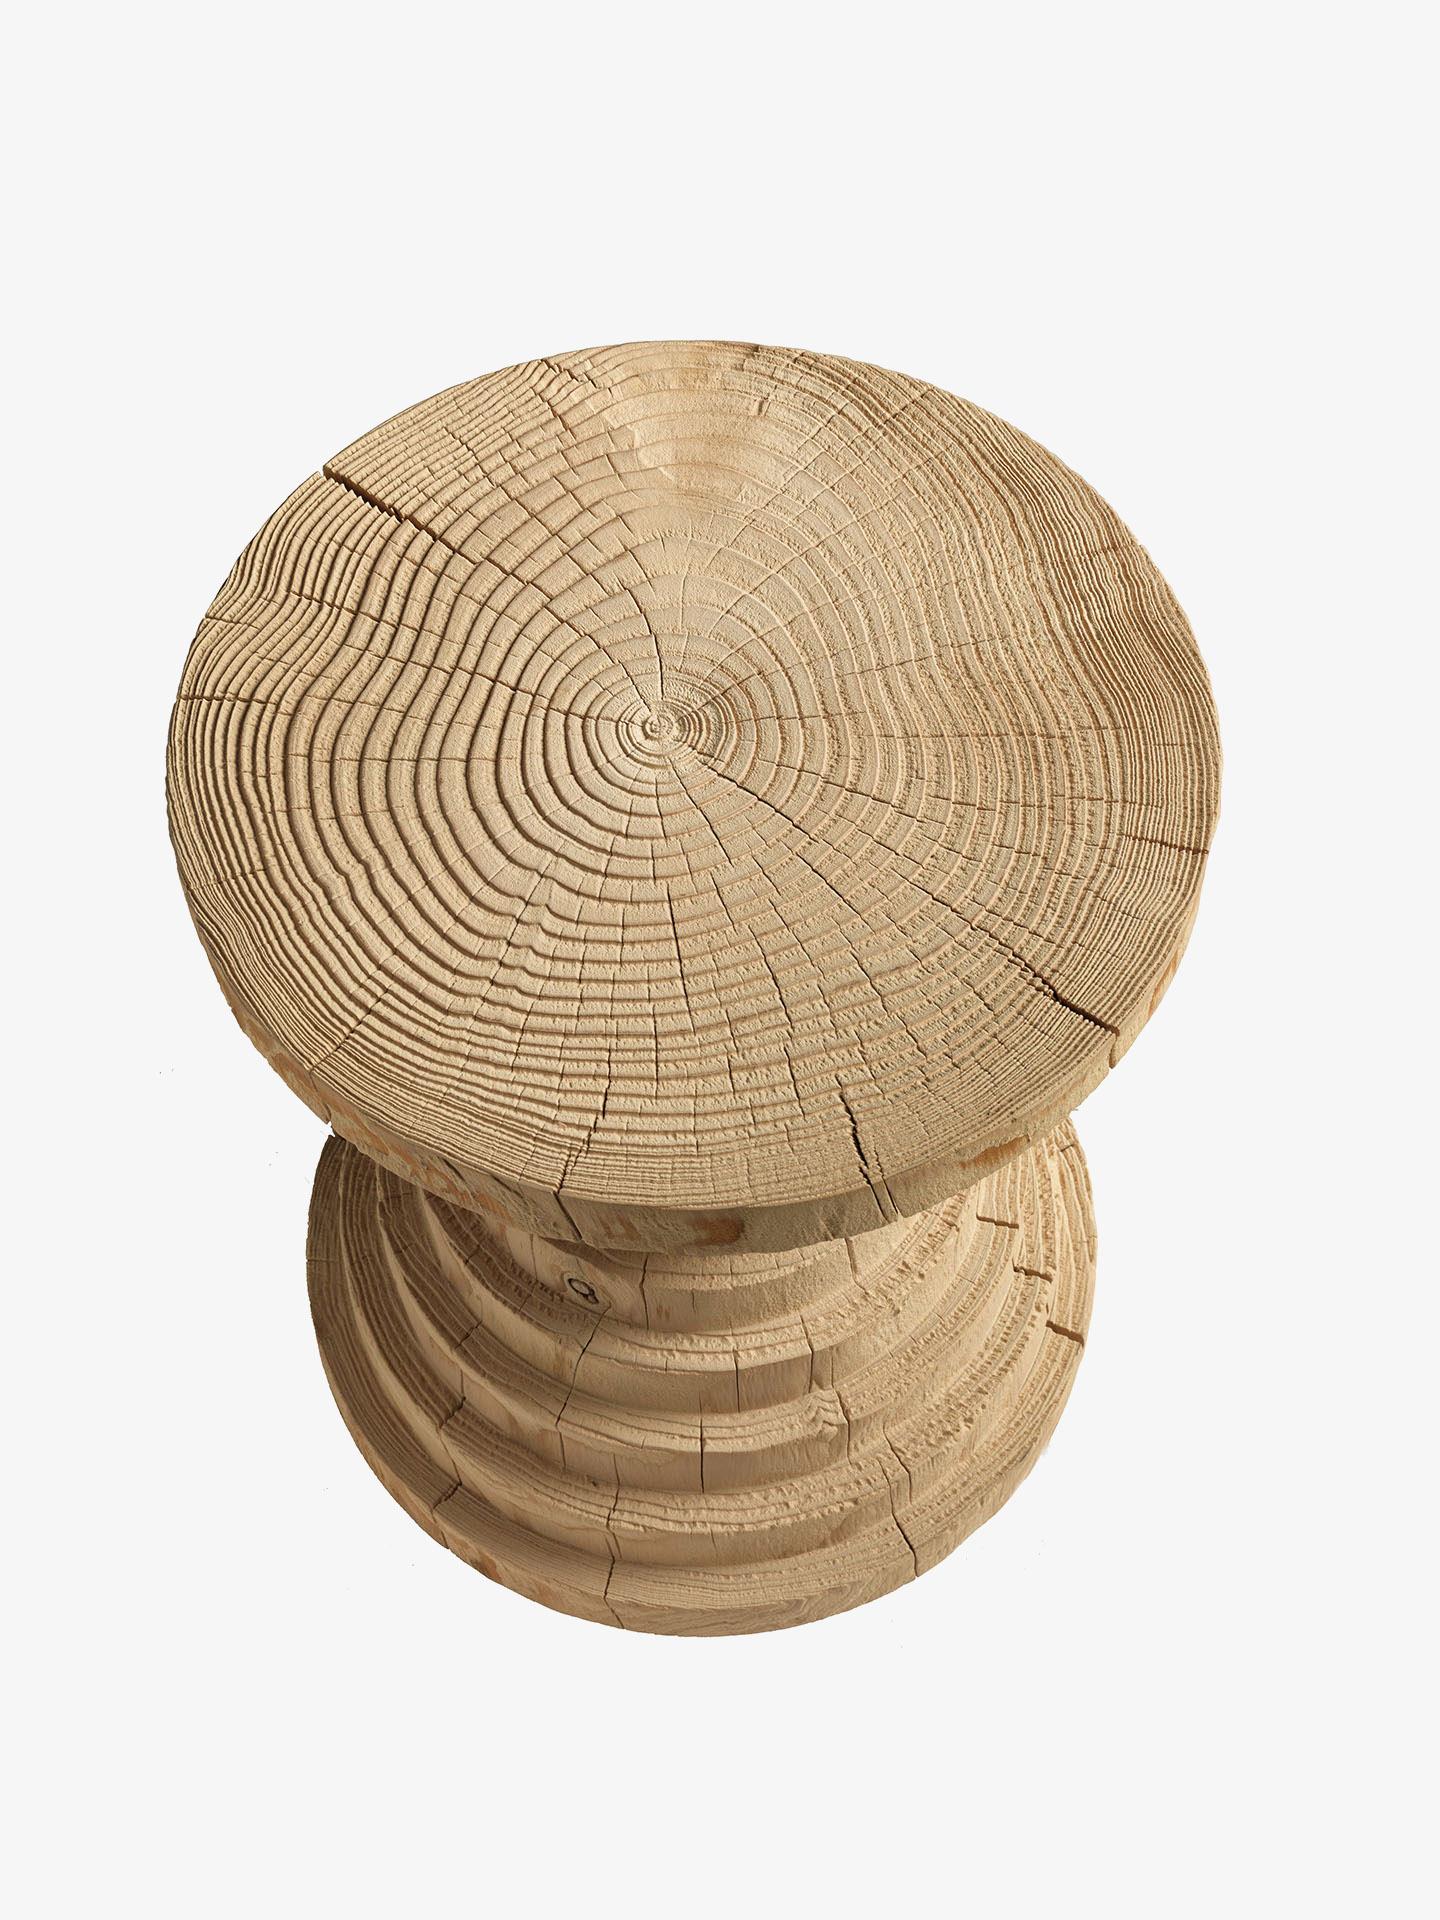 Stool made from a single block of scented cedar. It features many concentric layers that appear to be superimposed from large to small and from small to large. Designed by Michele de Lucchi.